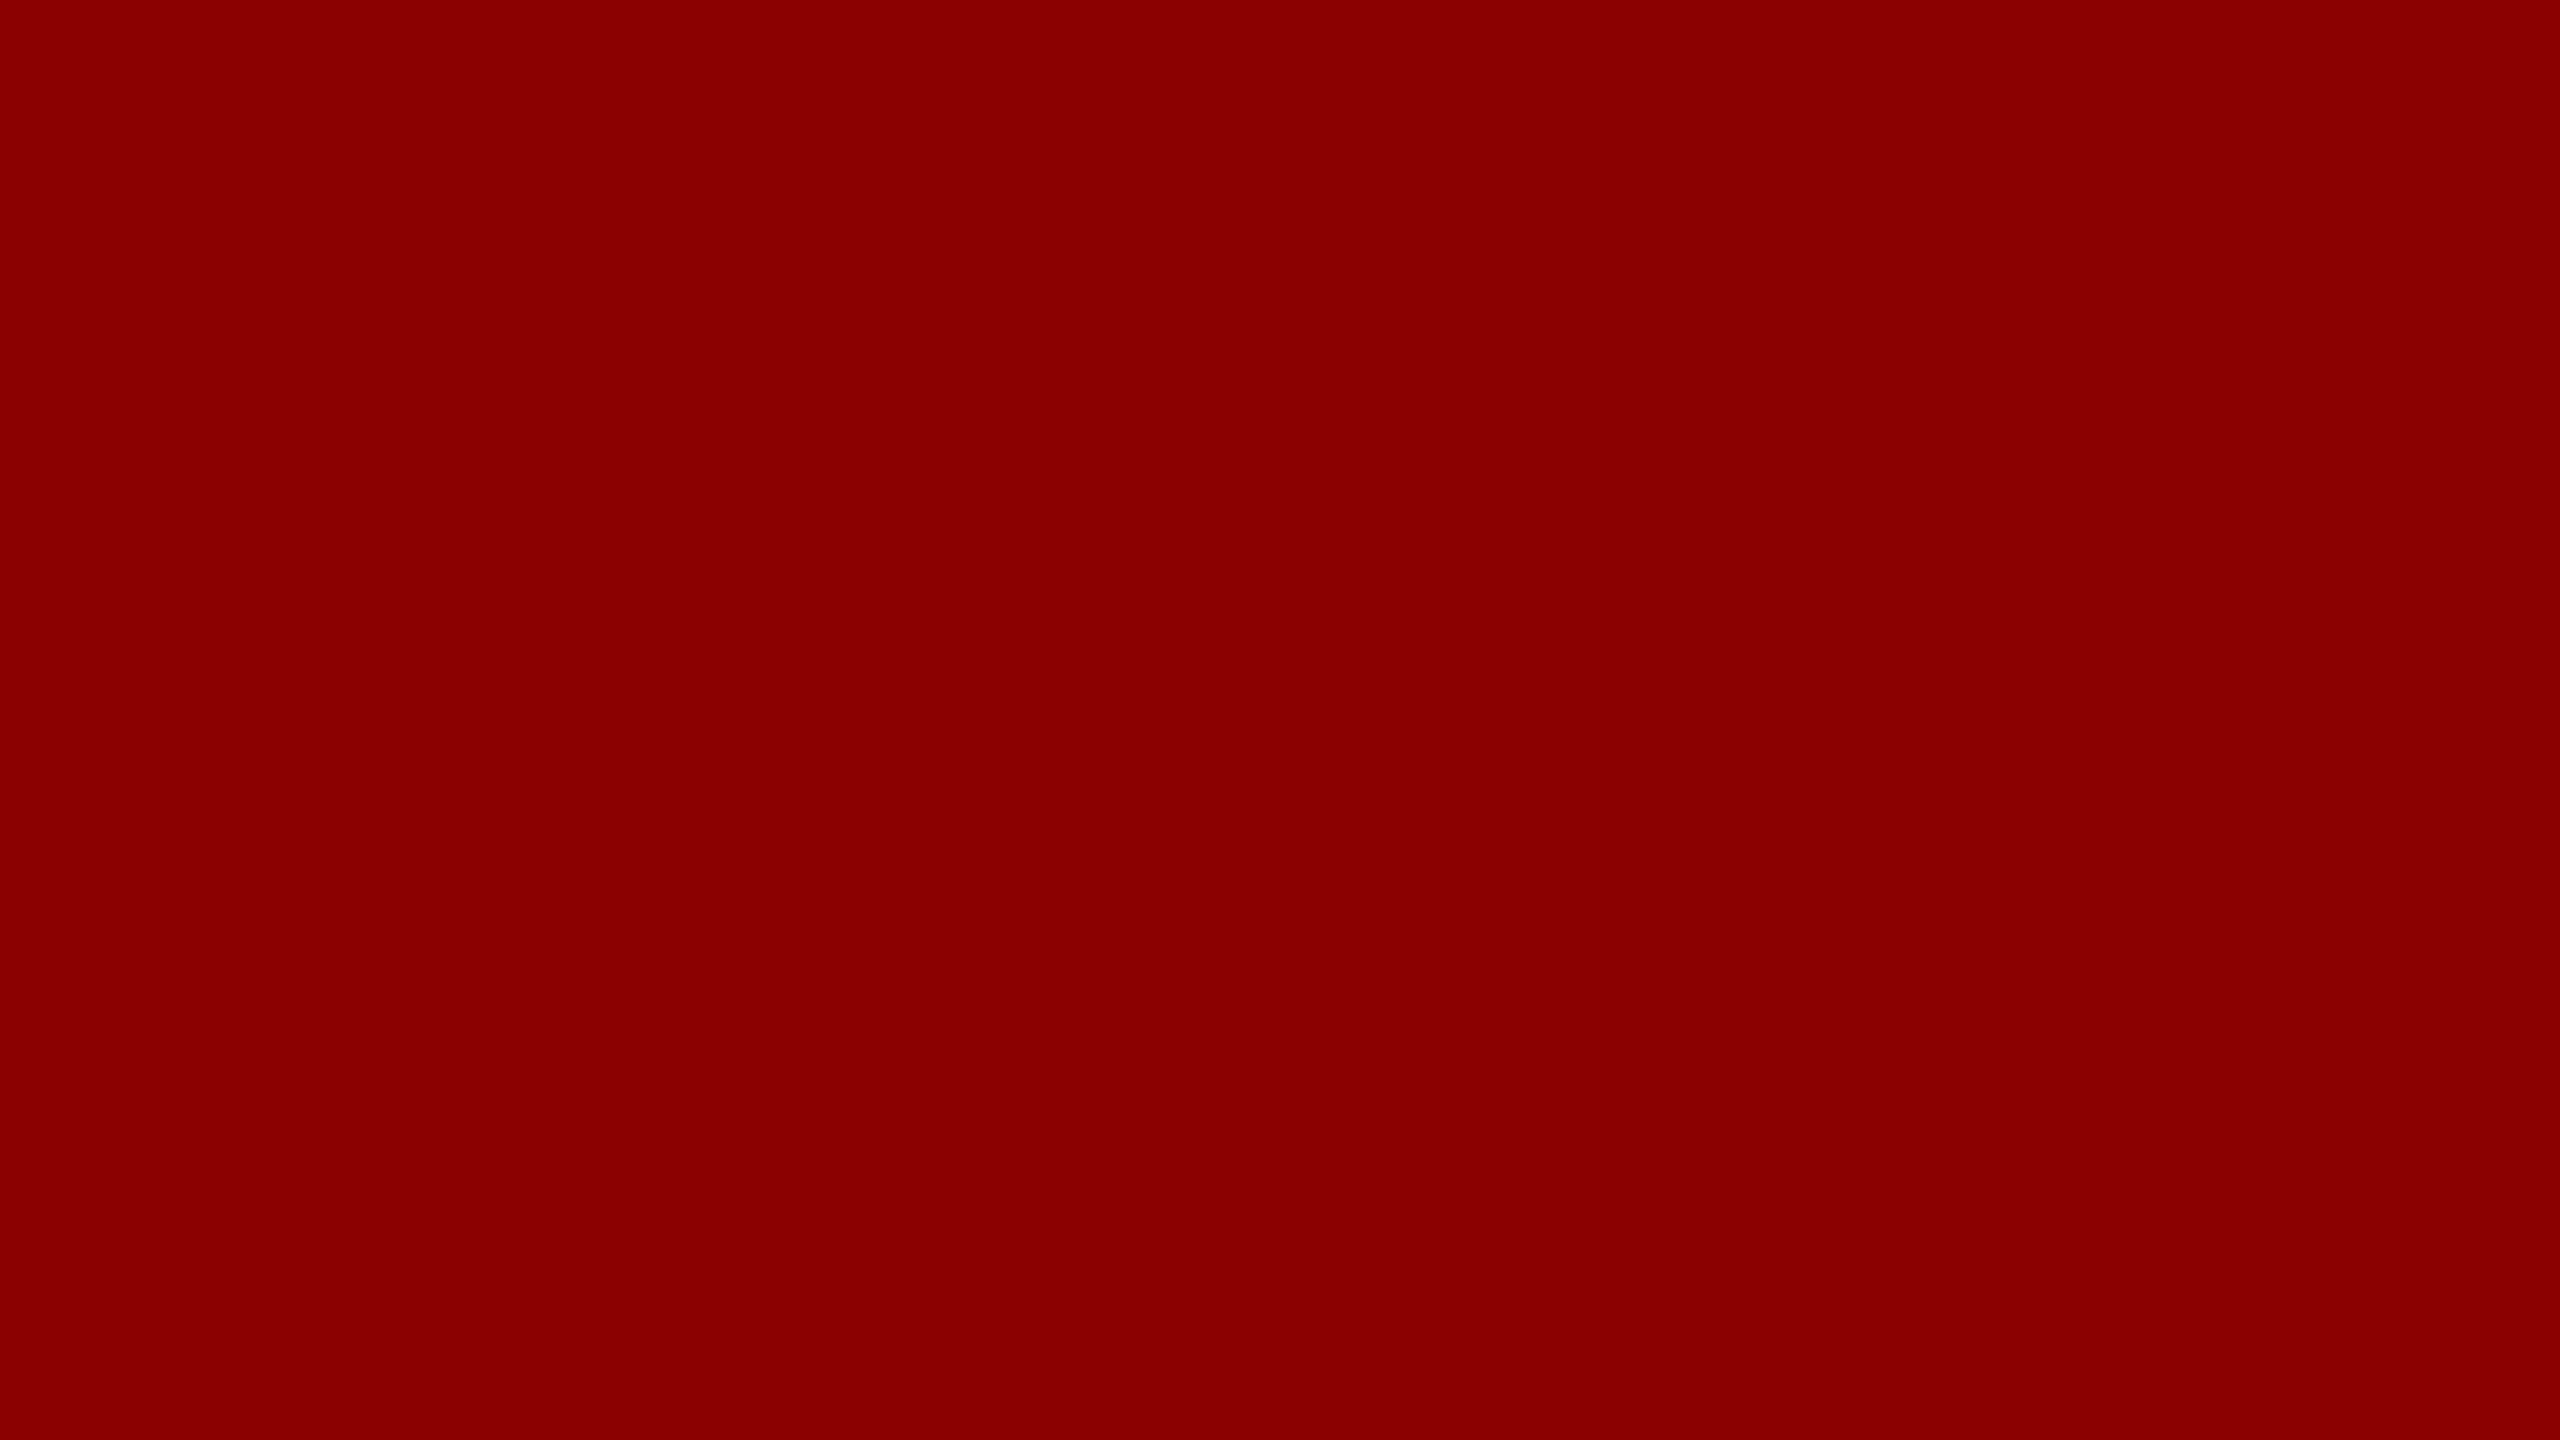 Resolution Dark Red Solid Color Background And